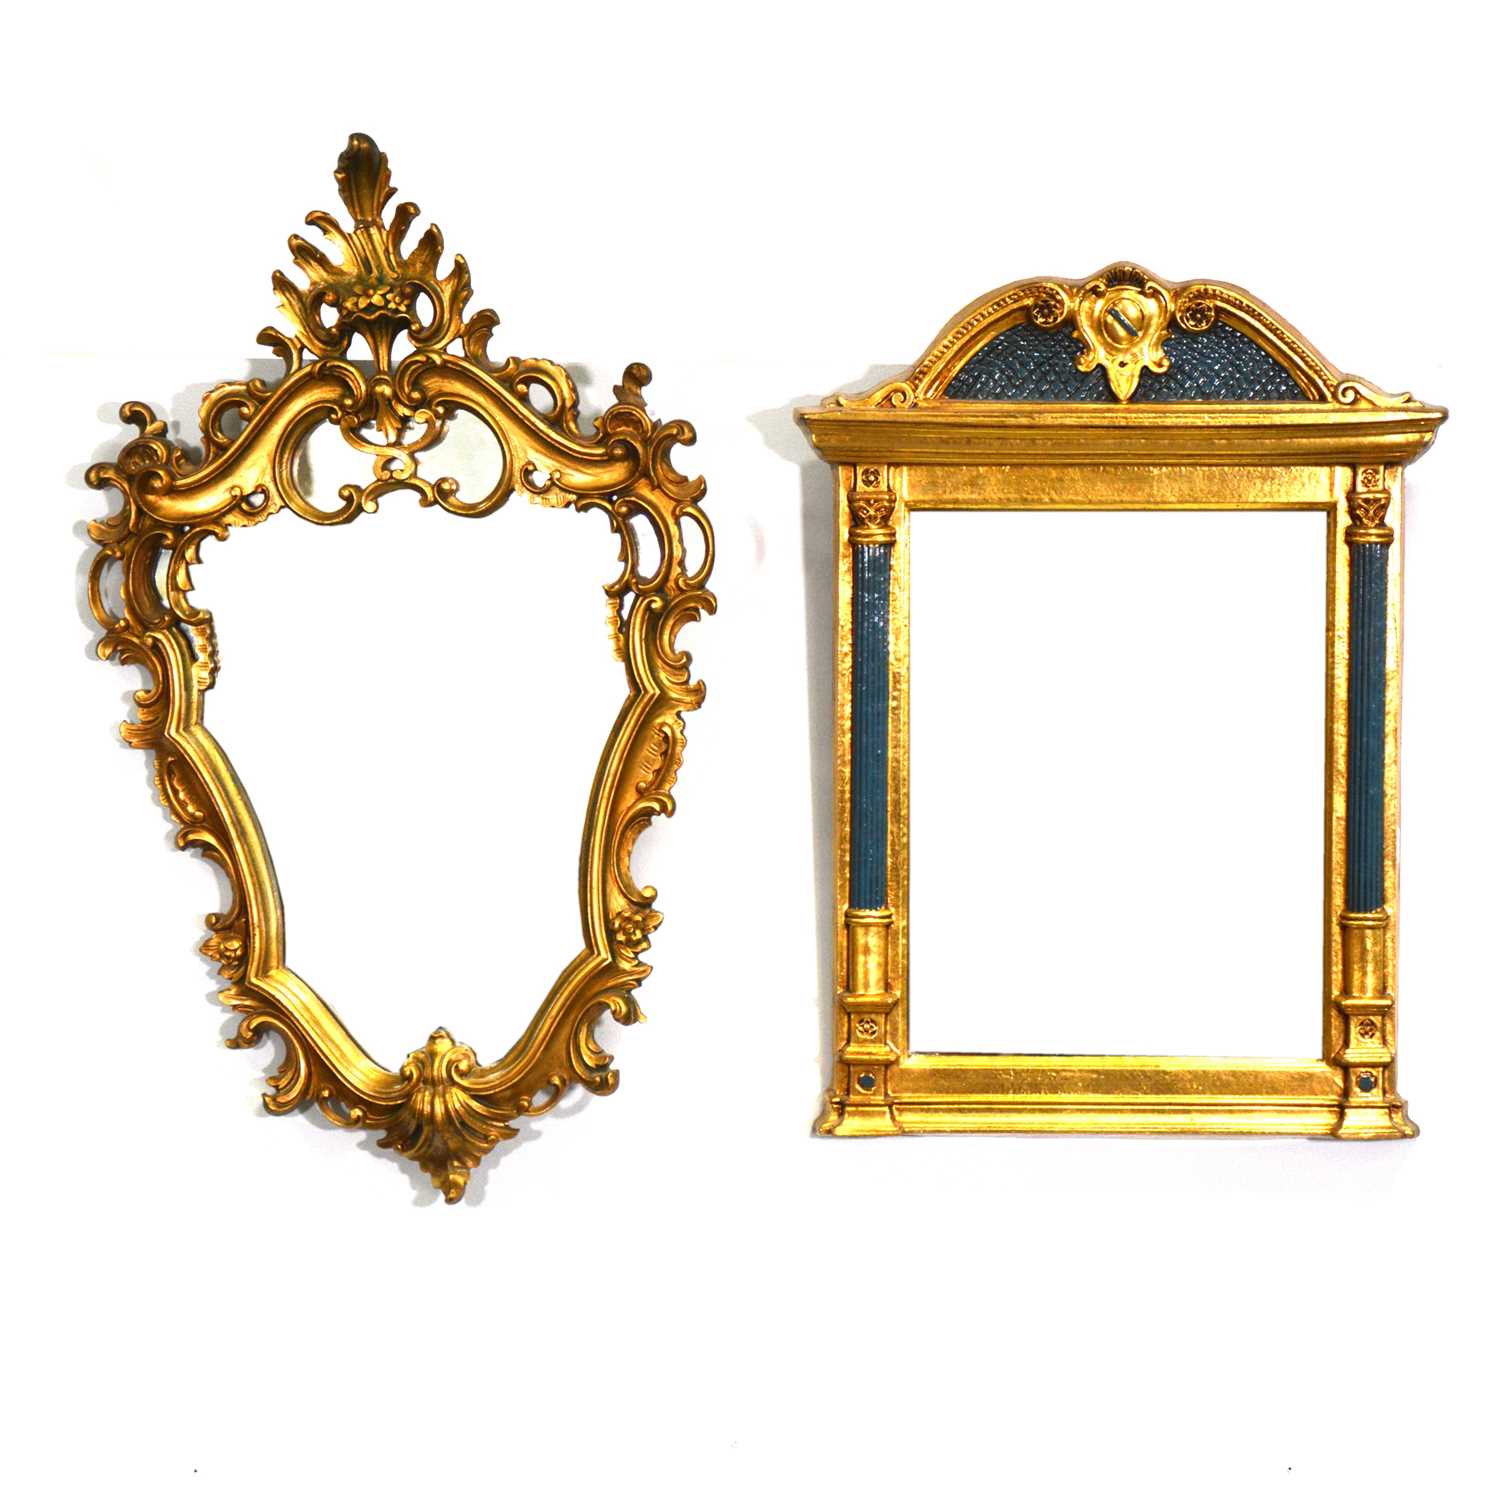 Two modern wall mirrors,